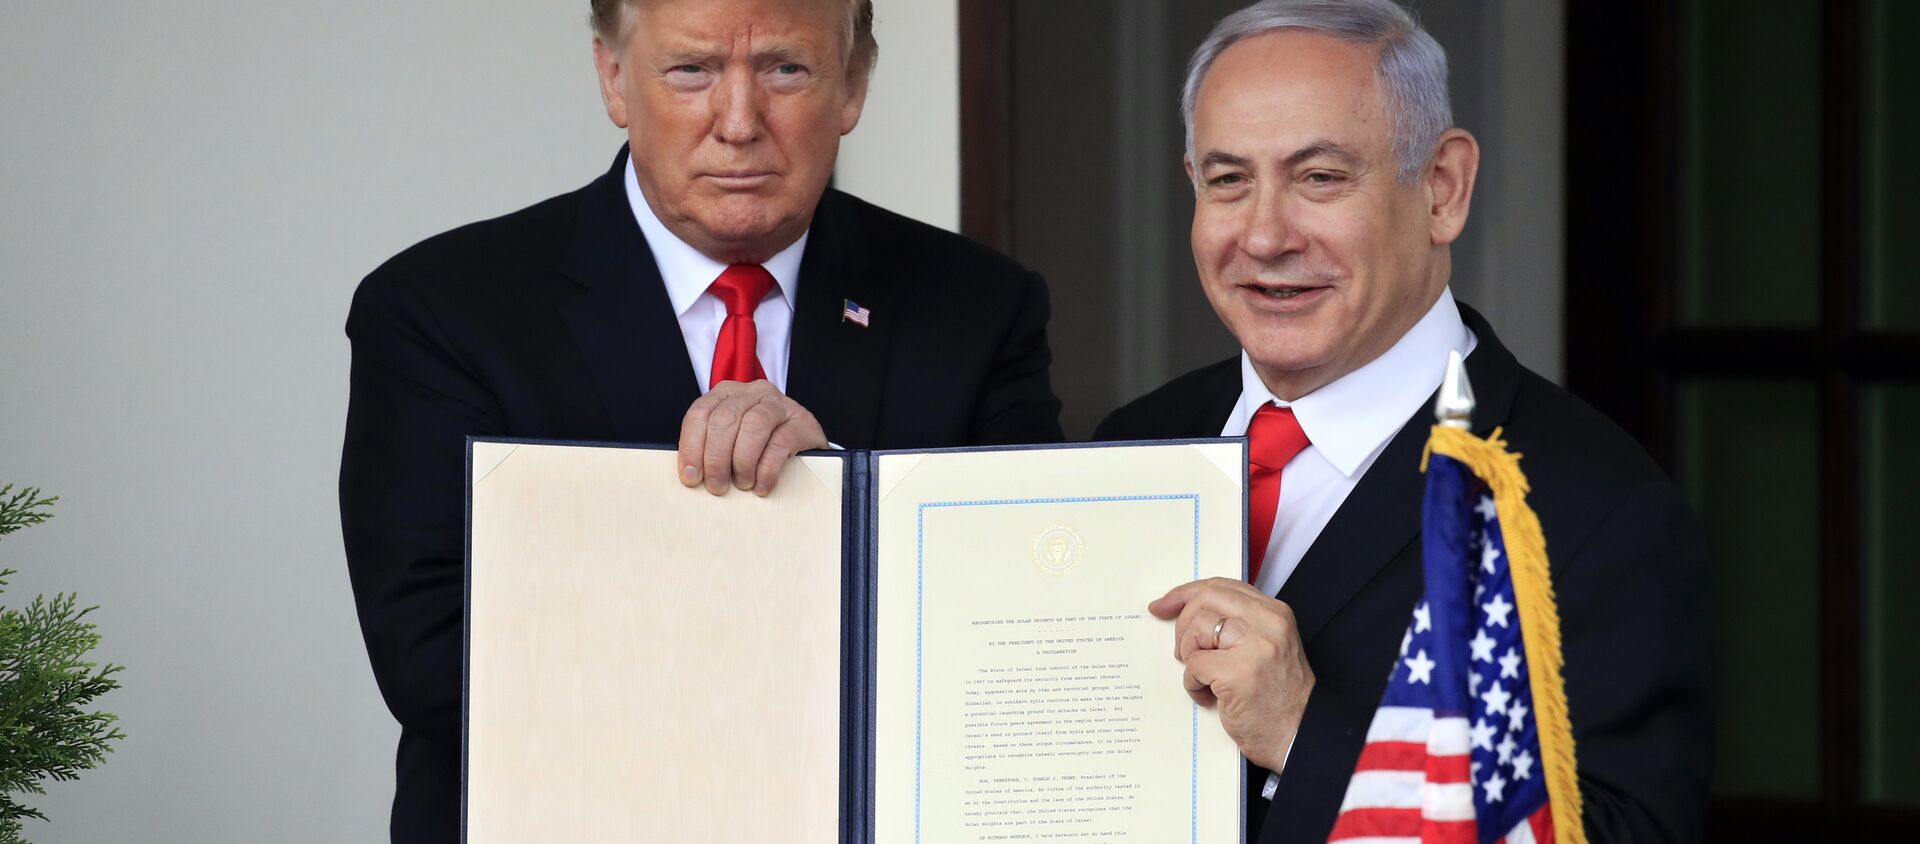 U.S. President Donald Trump and Israel's Prime Minister Benjamin Netanyahu hold up a proclamation recognizing Israel's sovereignty over the Golan Heights as Netanyahu exits the White House from the West Wing in Washington, U.S. March 25, 2019 - Sputnik International, 1920, 31.05.2019